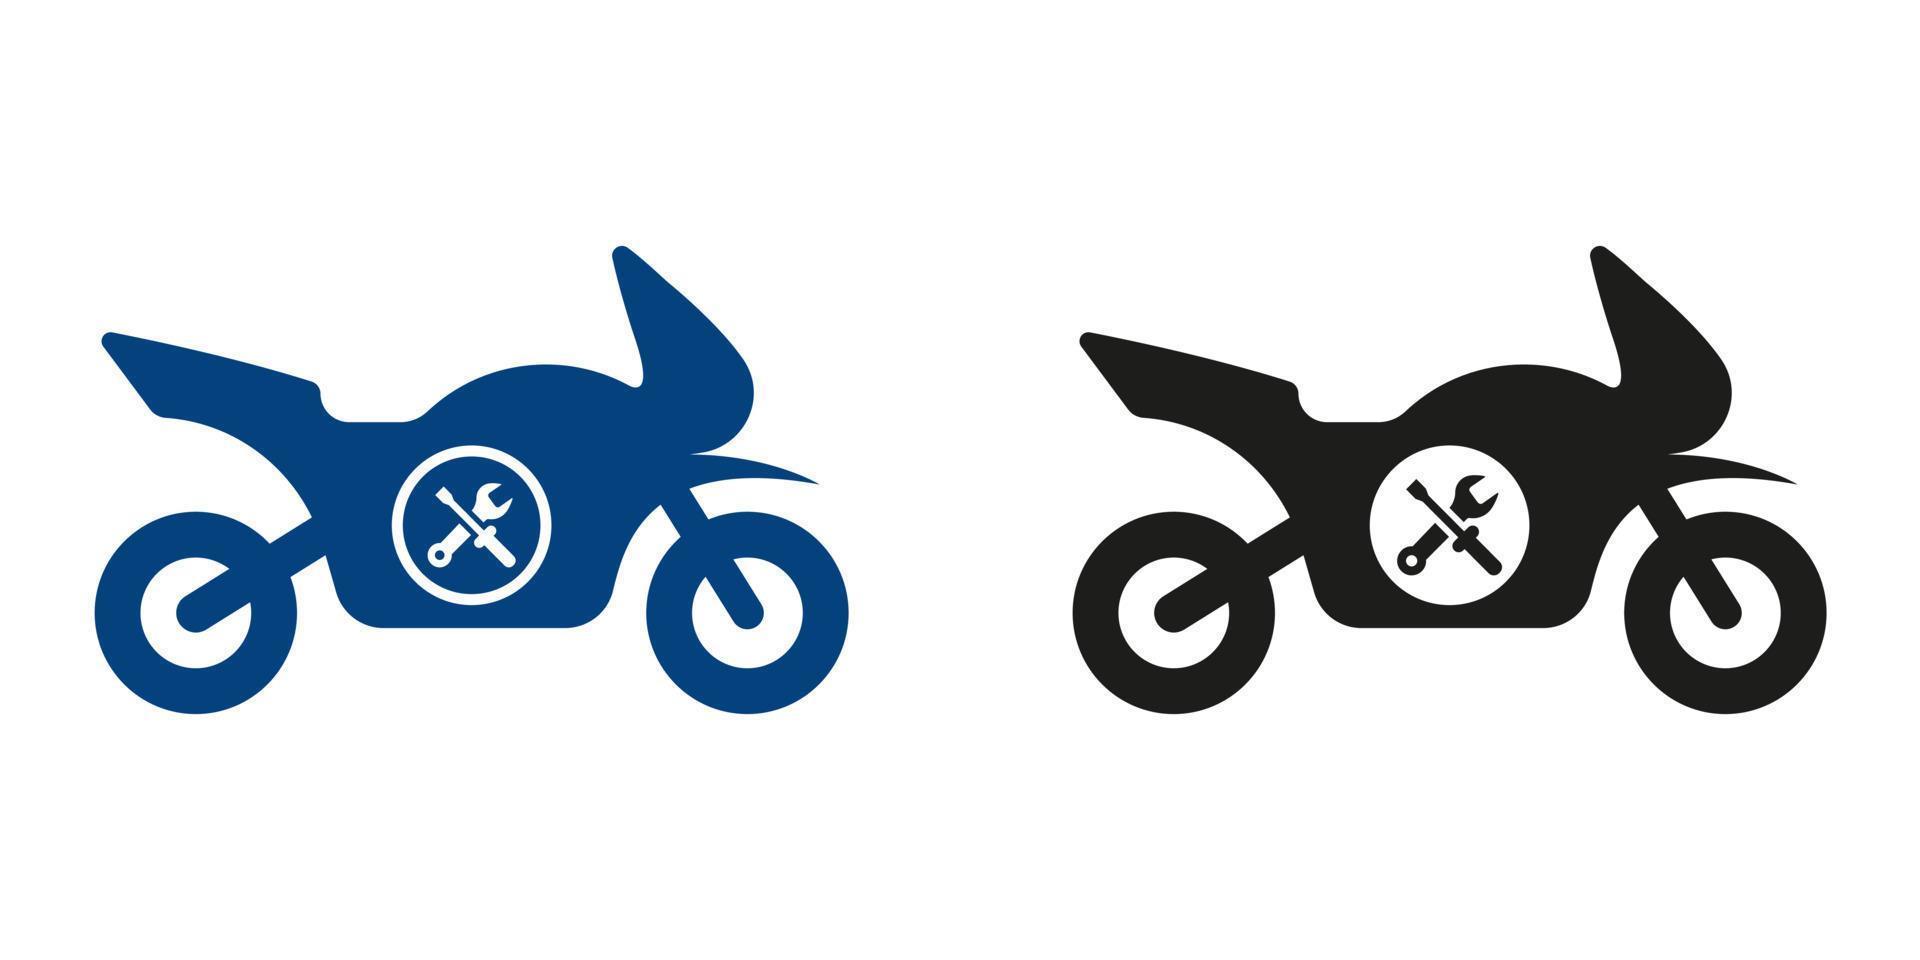 Motorbike Workshop Silhouette Icon Set. Service Center for Fixing Motorbike Pictogram. Motorcycle with Wrench, Maintenance Symbol Collection on White Background. Isolated Vector Illustration.